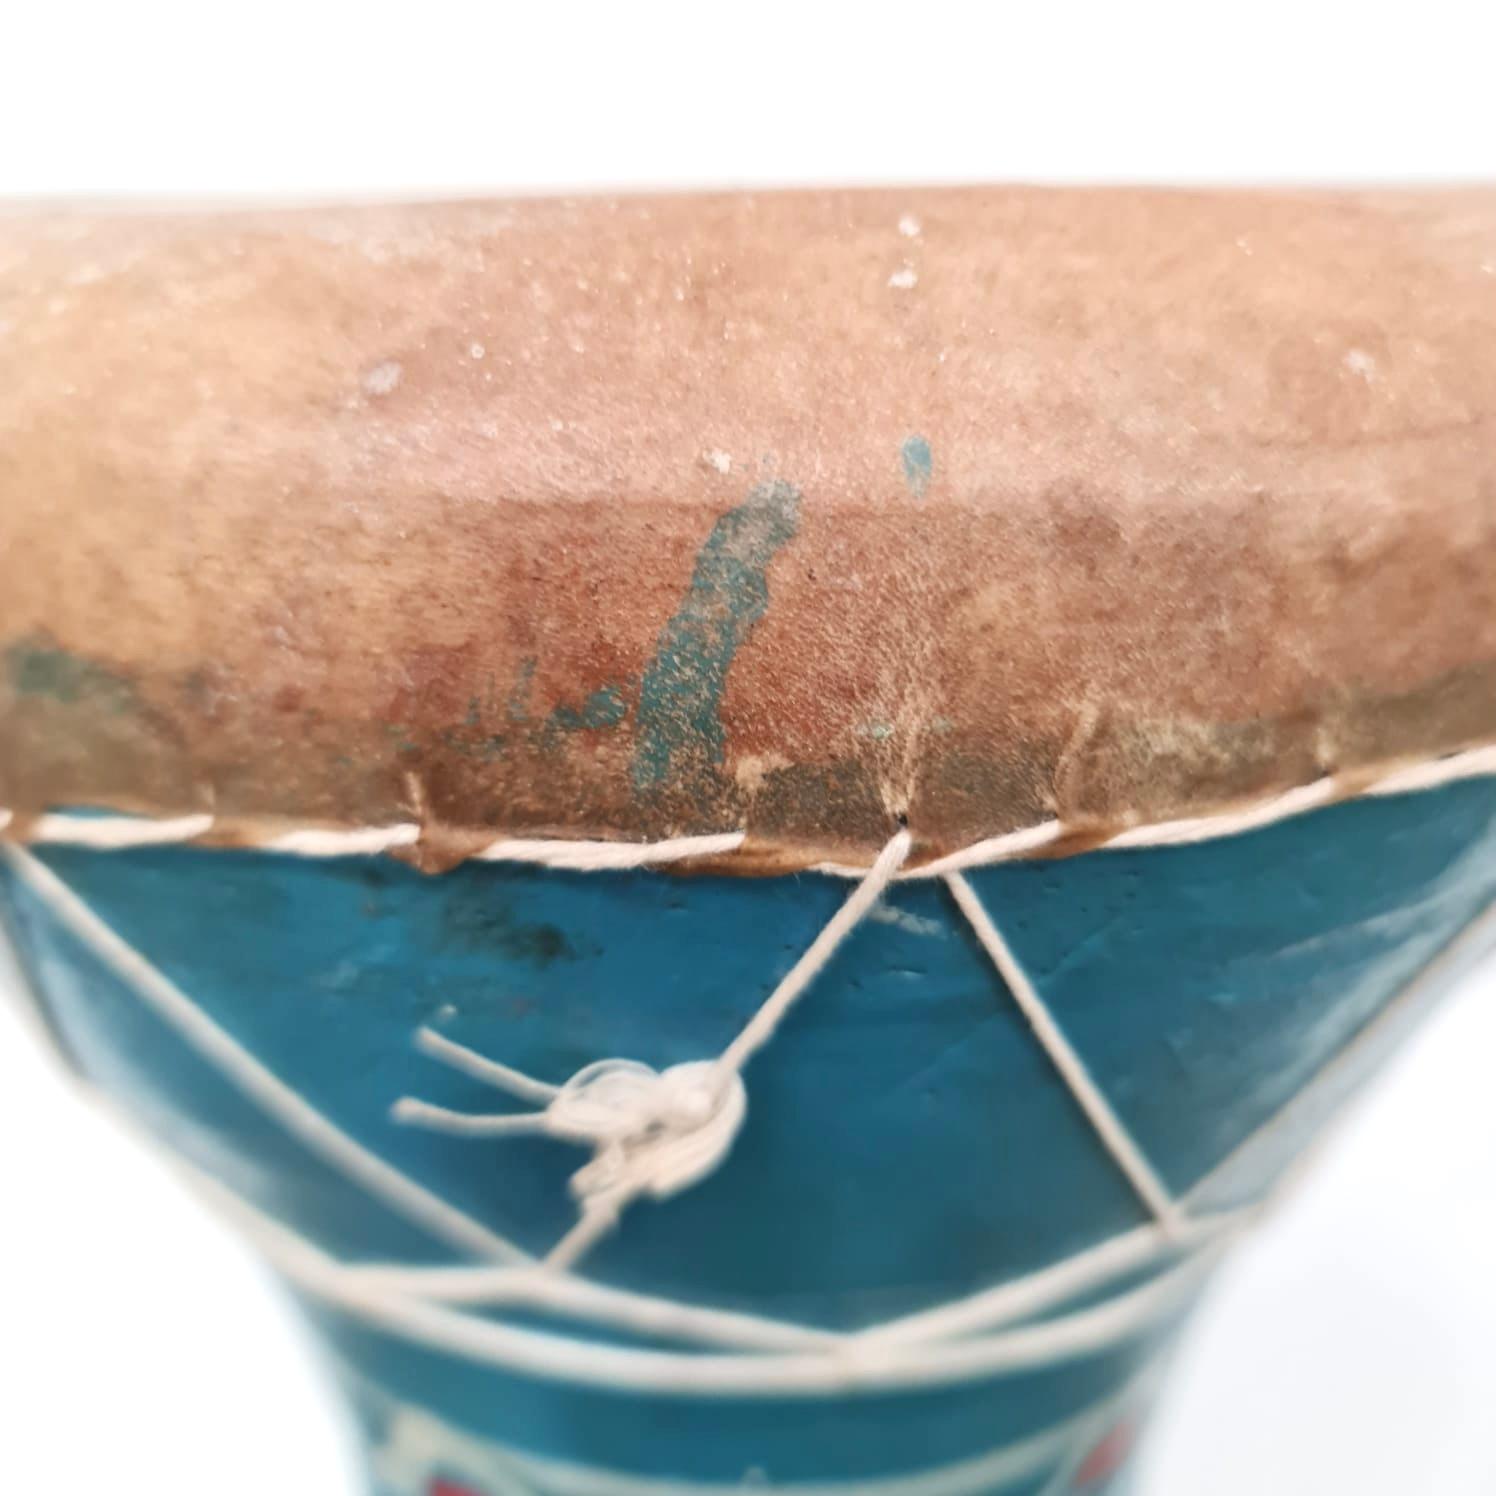 Handmade North African Clay Drum. A delight to see, touch and play. Made in the traditional method with a spun clay shell, claf skin and hand painted floral motif. Perfect as a small sidetable or accent piece on the floor or sideboard. Date of